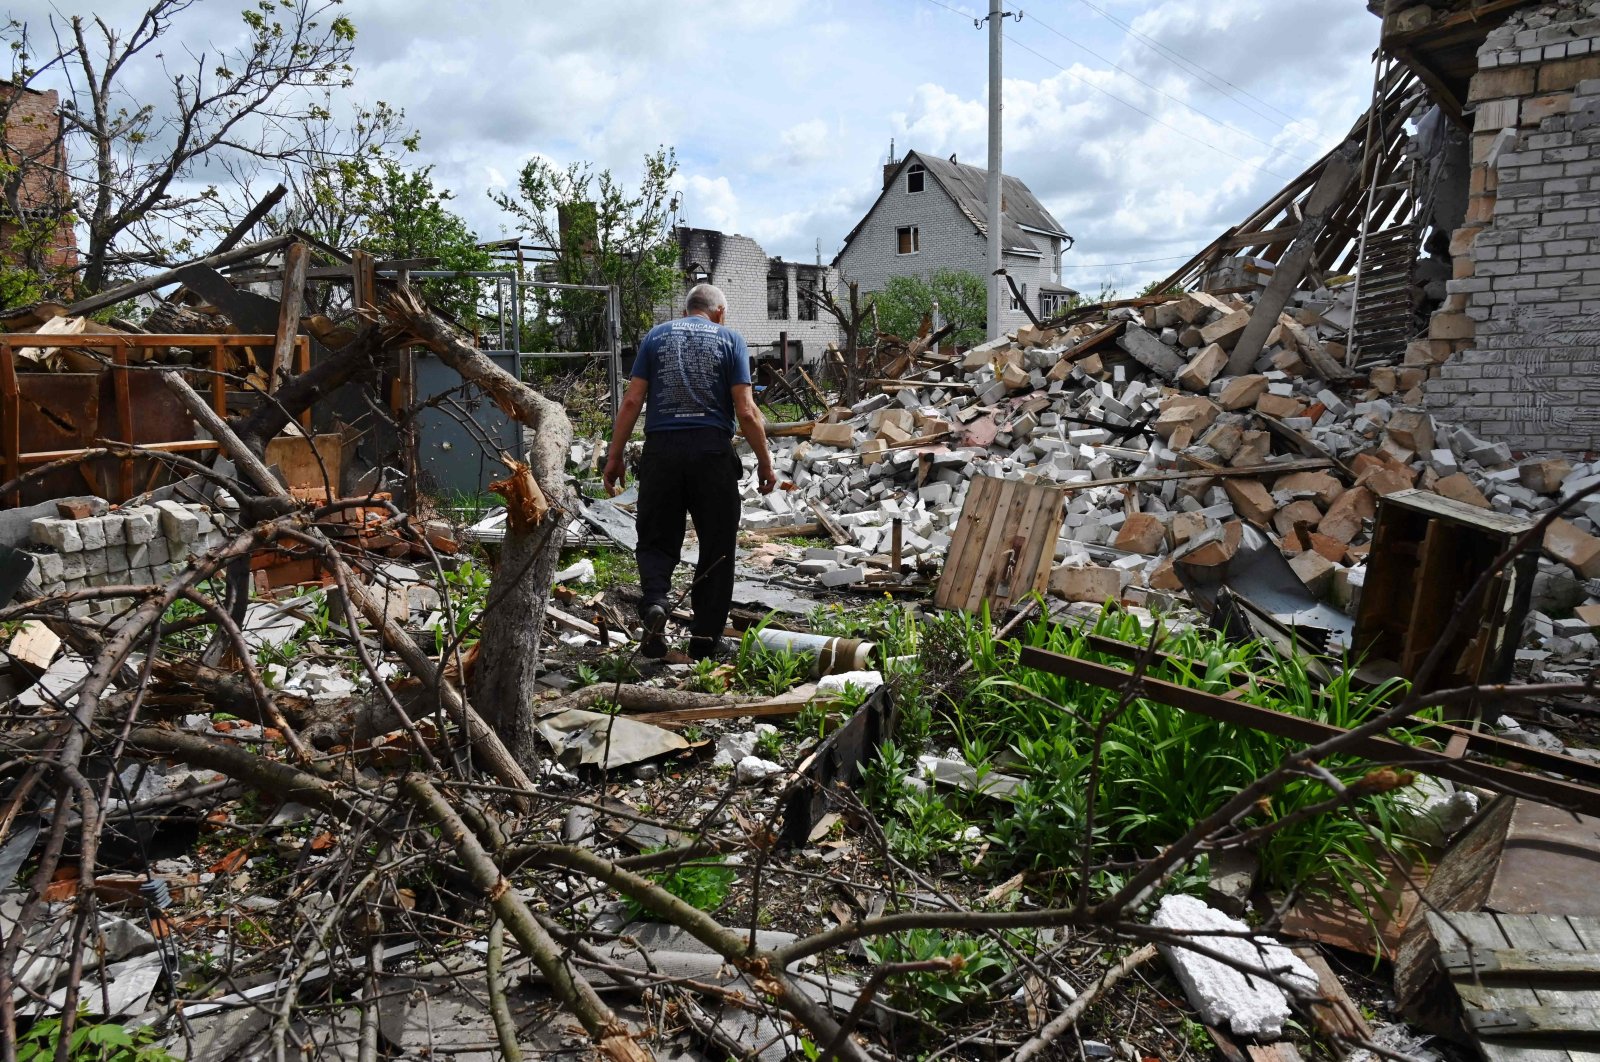  A local resident walks among debris in a yard of his destroyed house in the village of Mala Rogan, east of Kharkiv, on May 15, 2022, amid the Russian invasion of Ukraine. (Photo by SERGEY BOBOK / AFP)